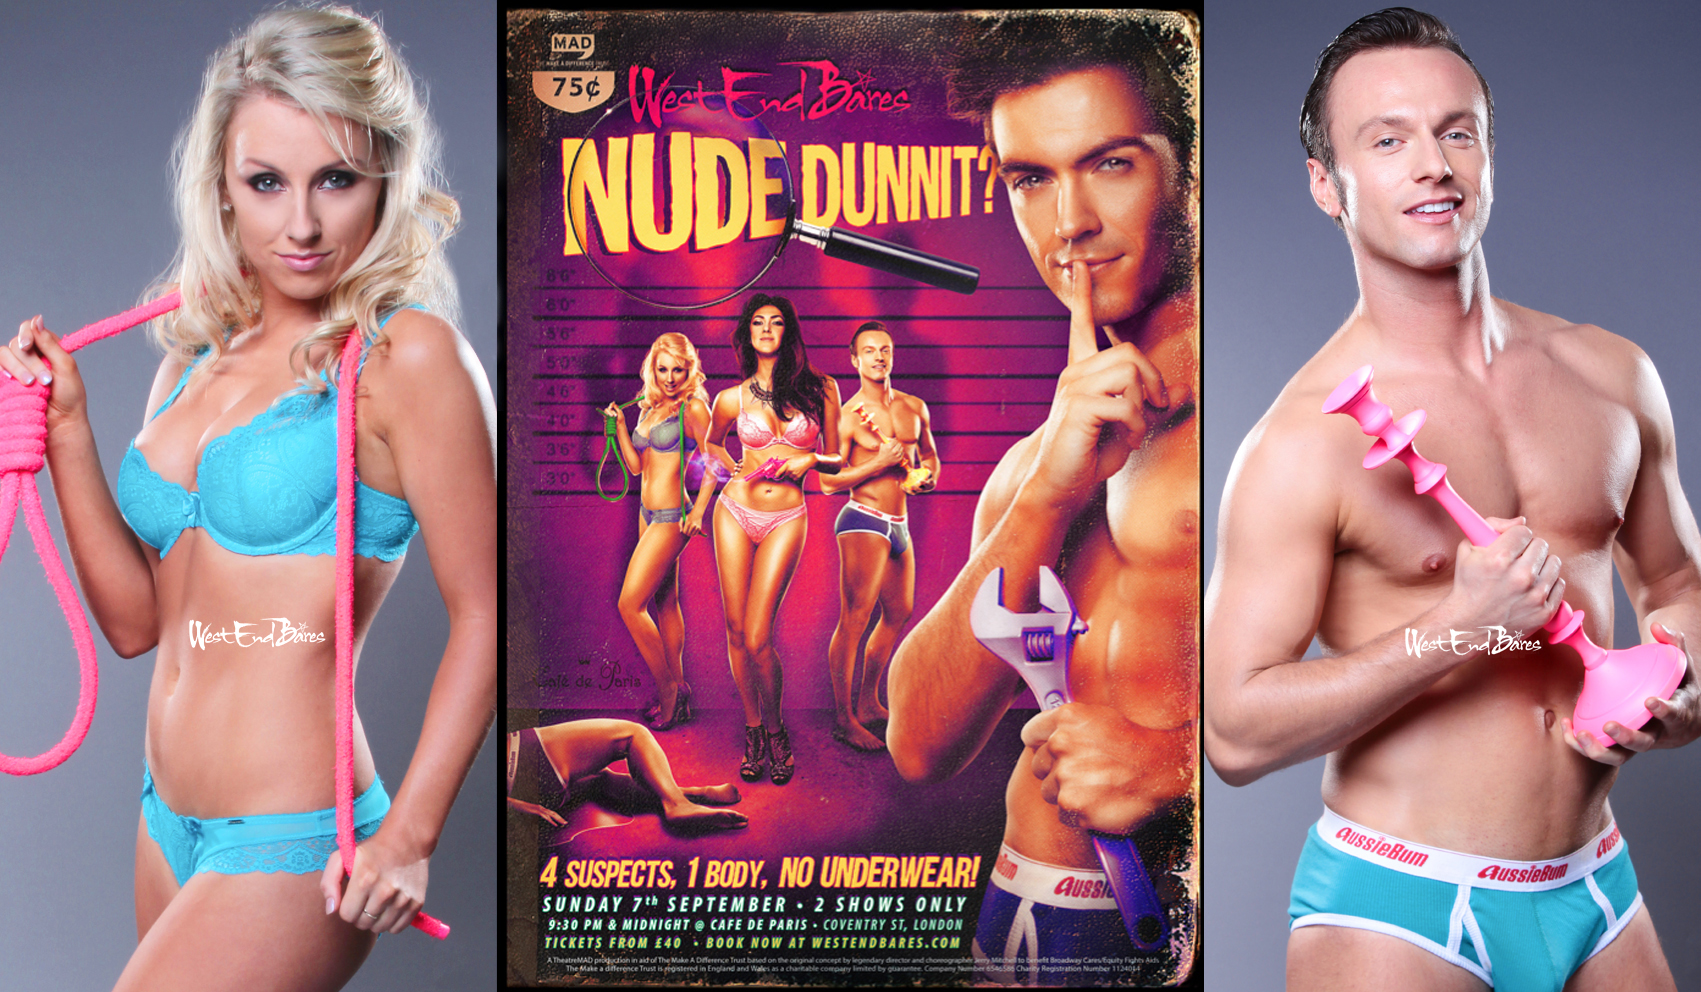 Nude Dunnit? WEB show promo images